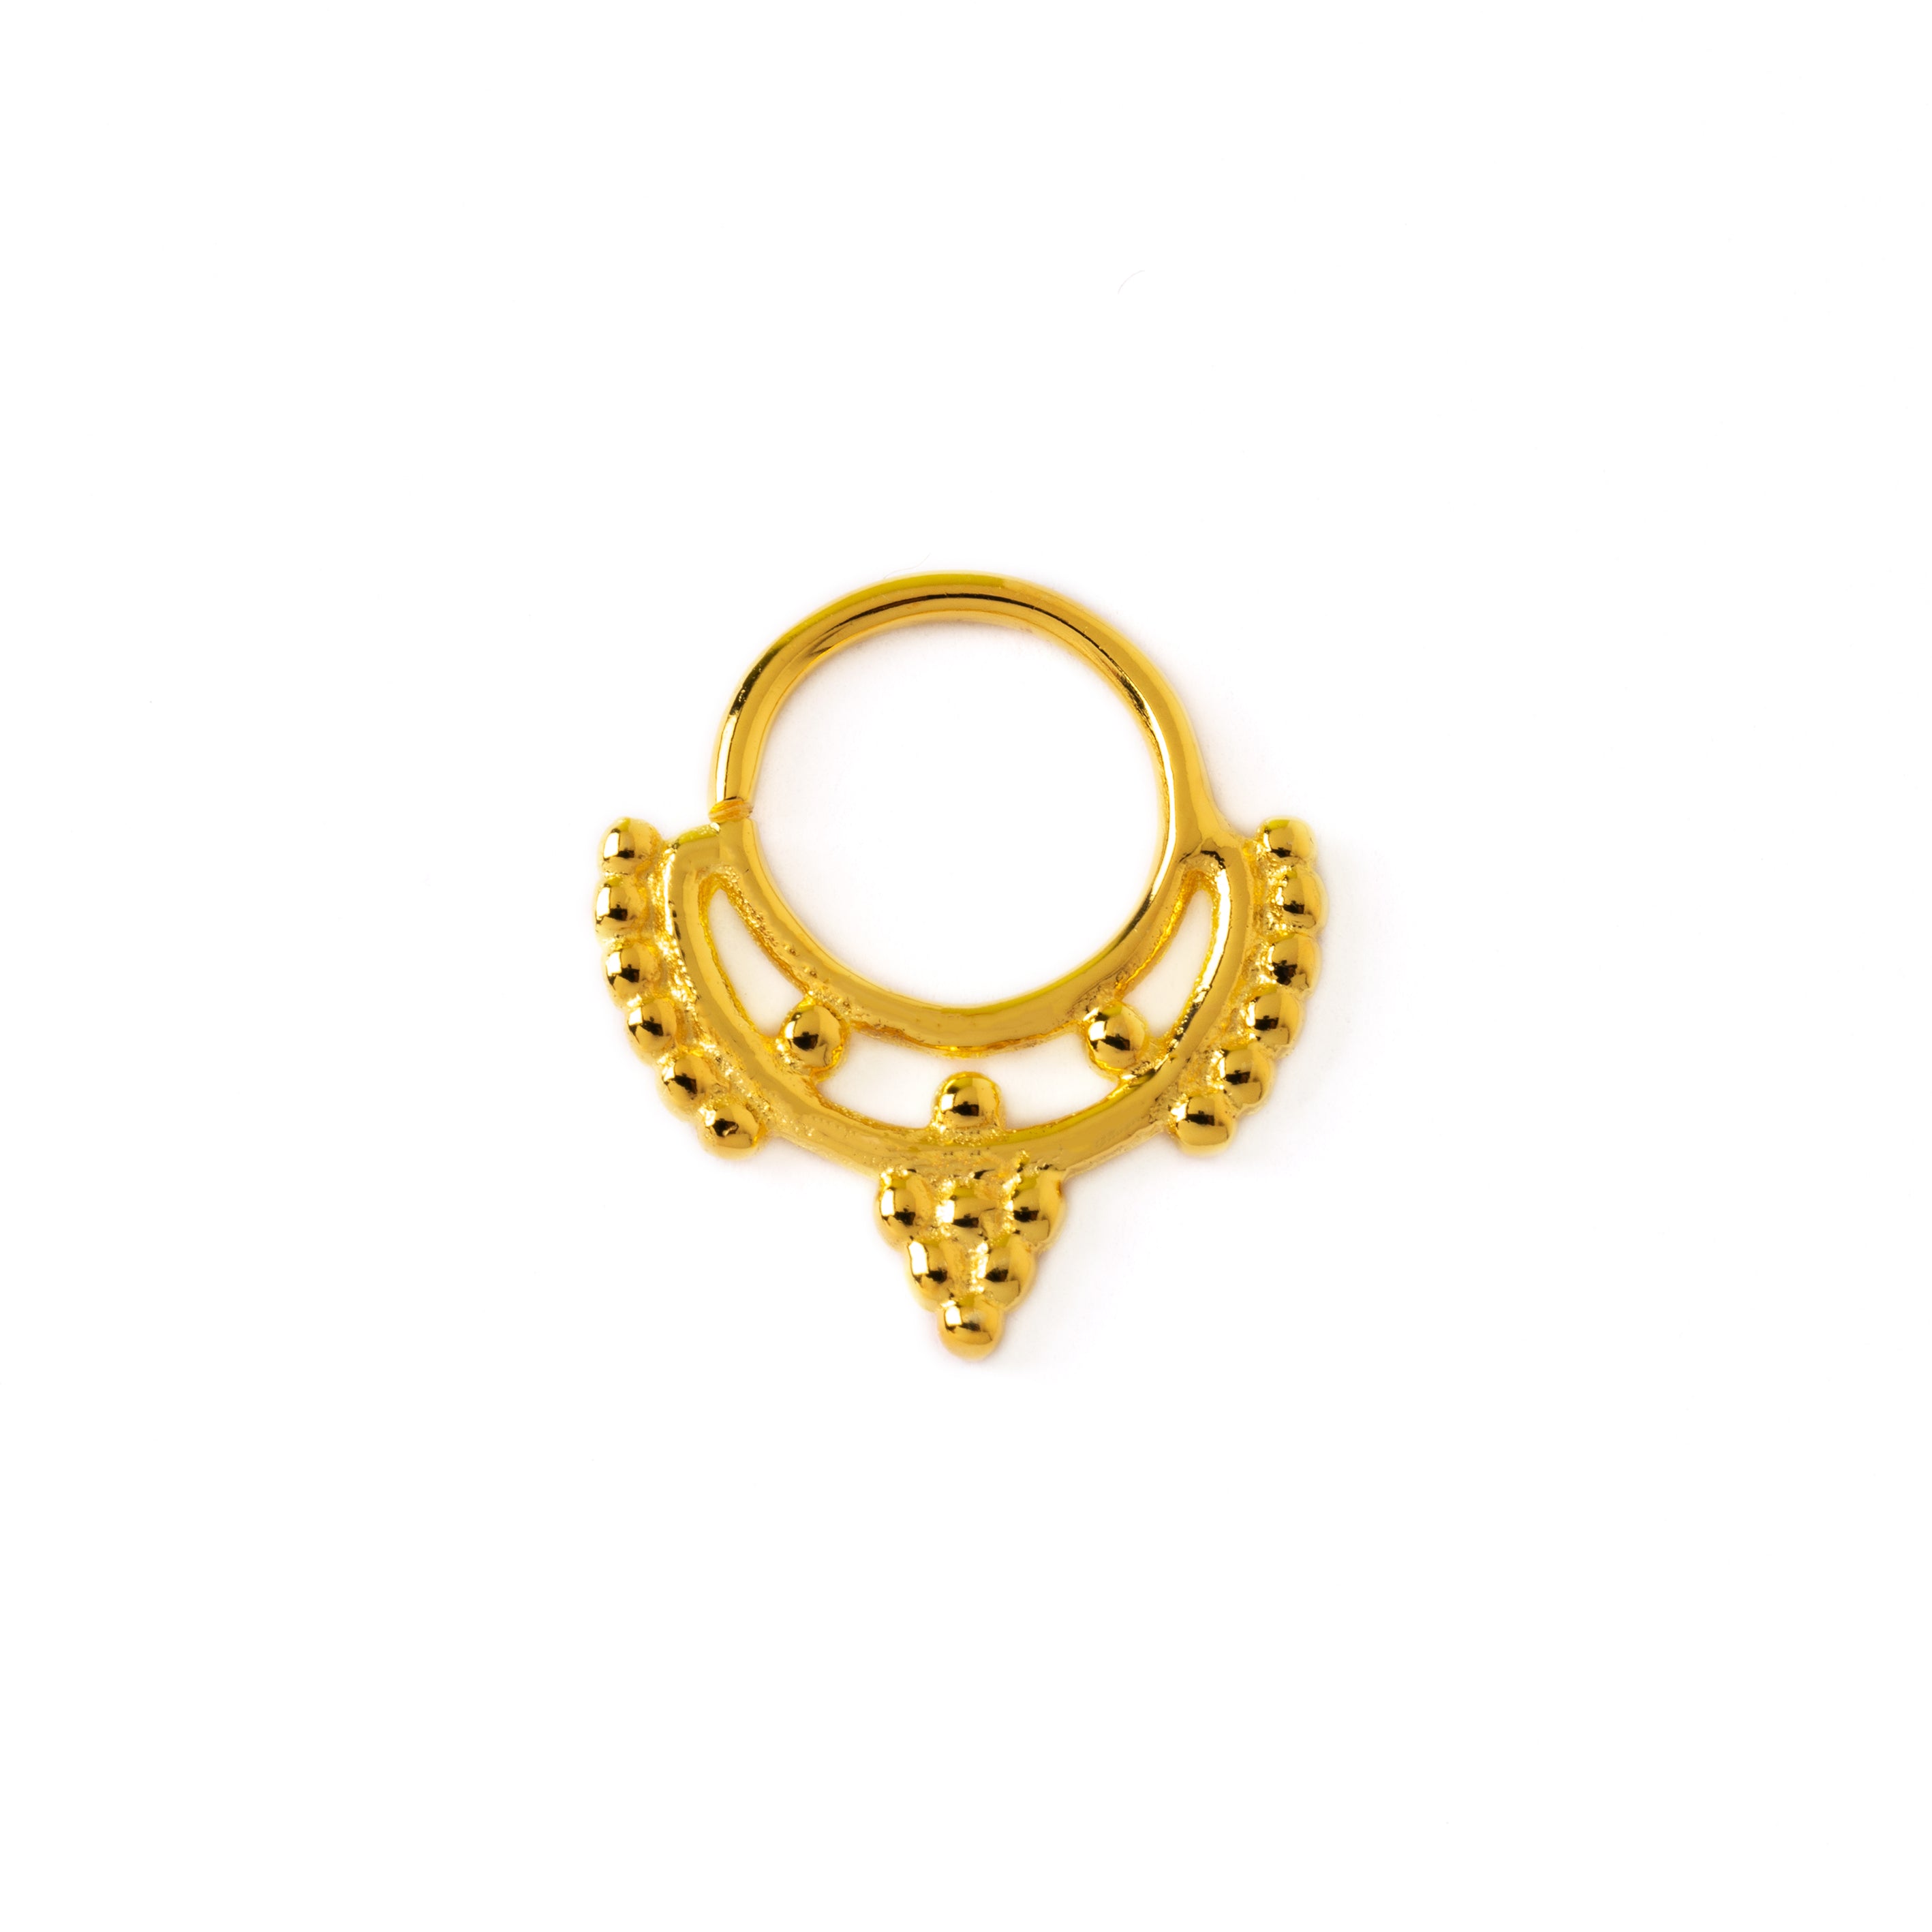 Ella 14K Gold Septum Nose Ring in with Natural Diamond Daith Piercing  earring | eBay